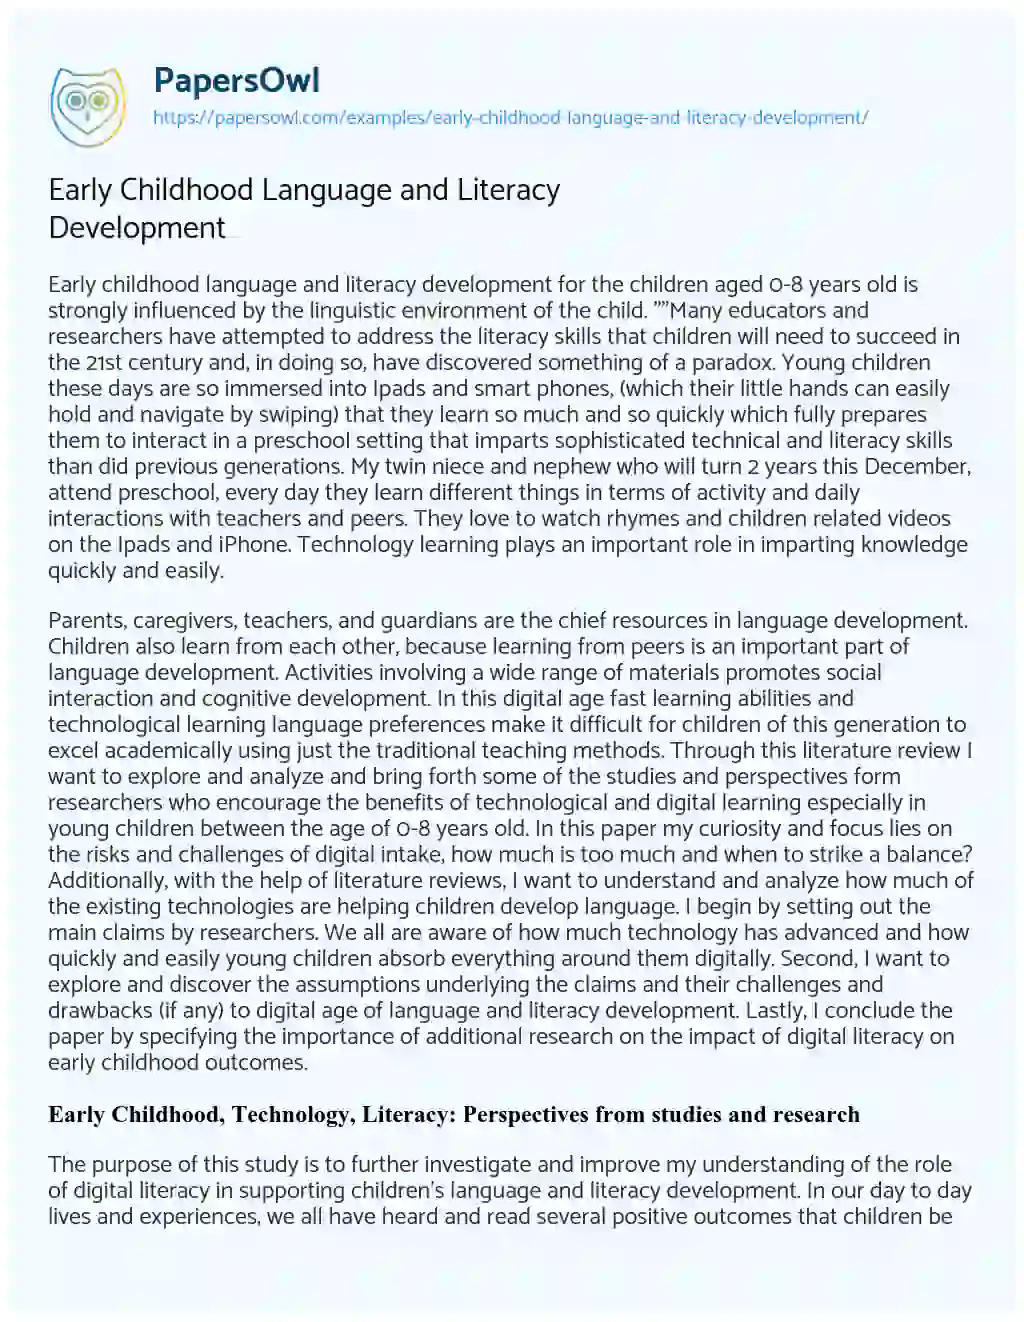 Essay on Early Childhood Language and Literacy Development